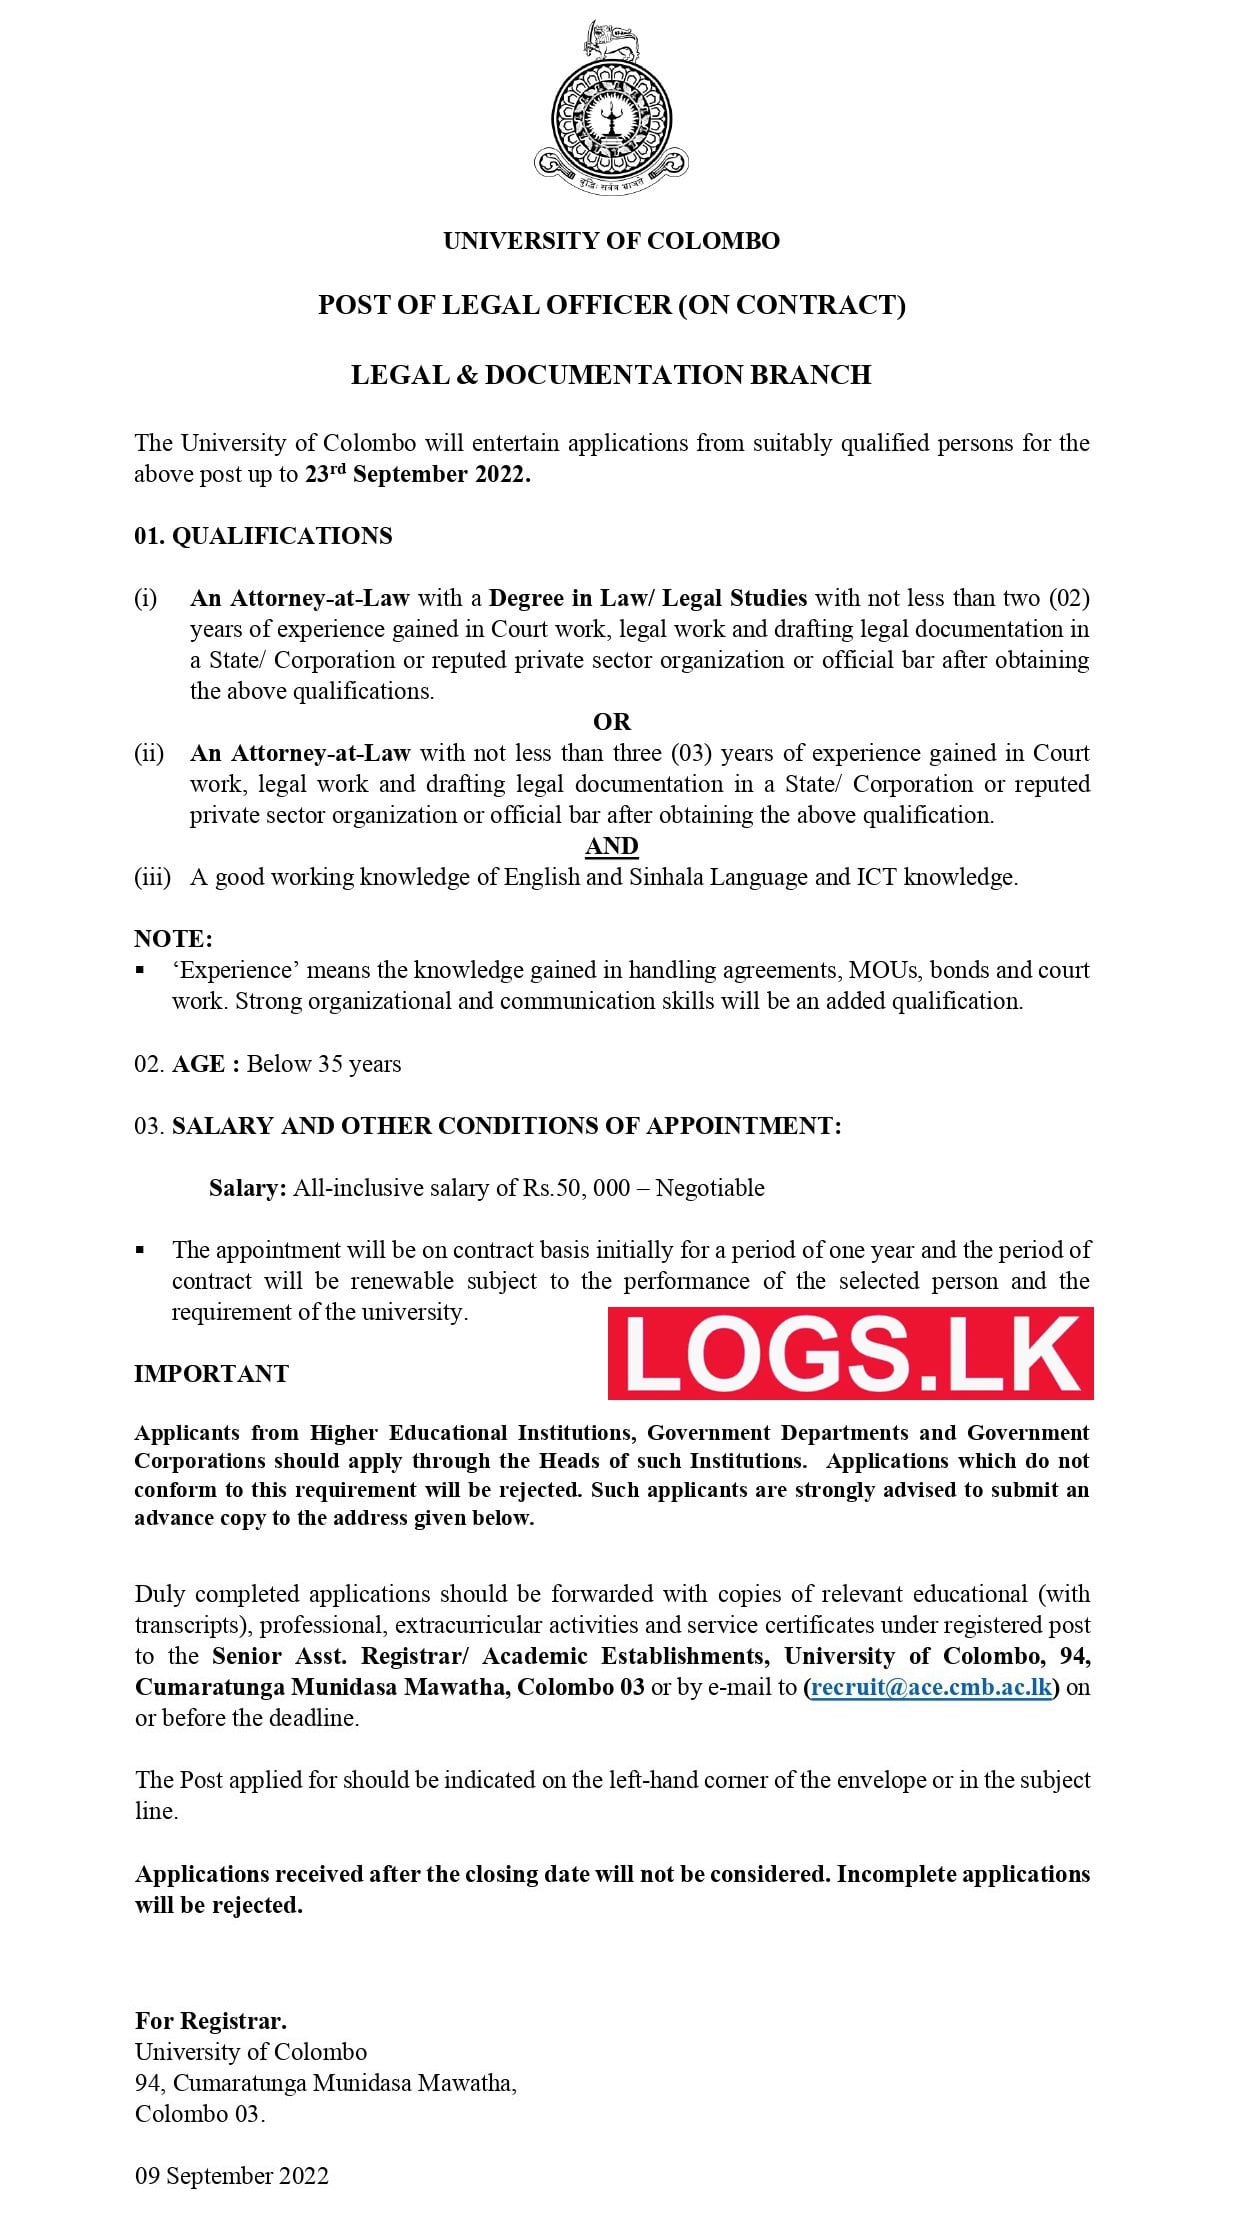 Legal Officer - University of Colombo Vacancies 2022 Details, Application